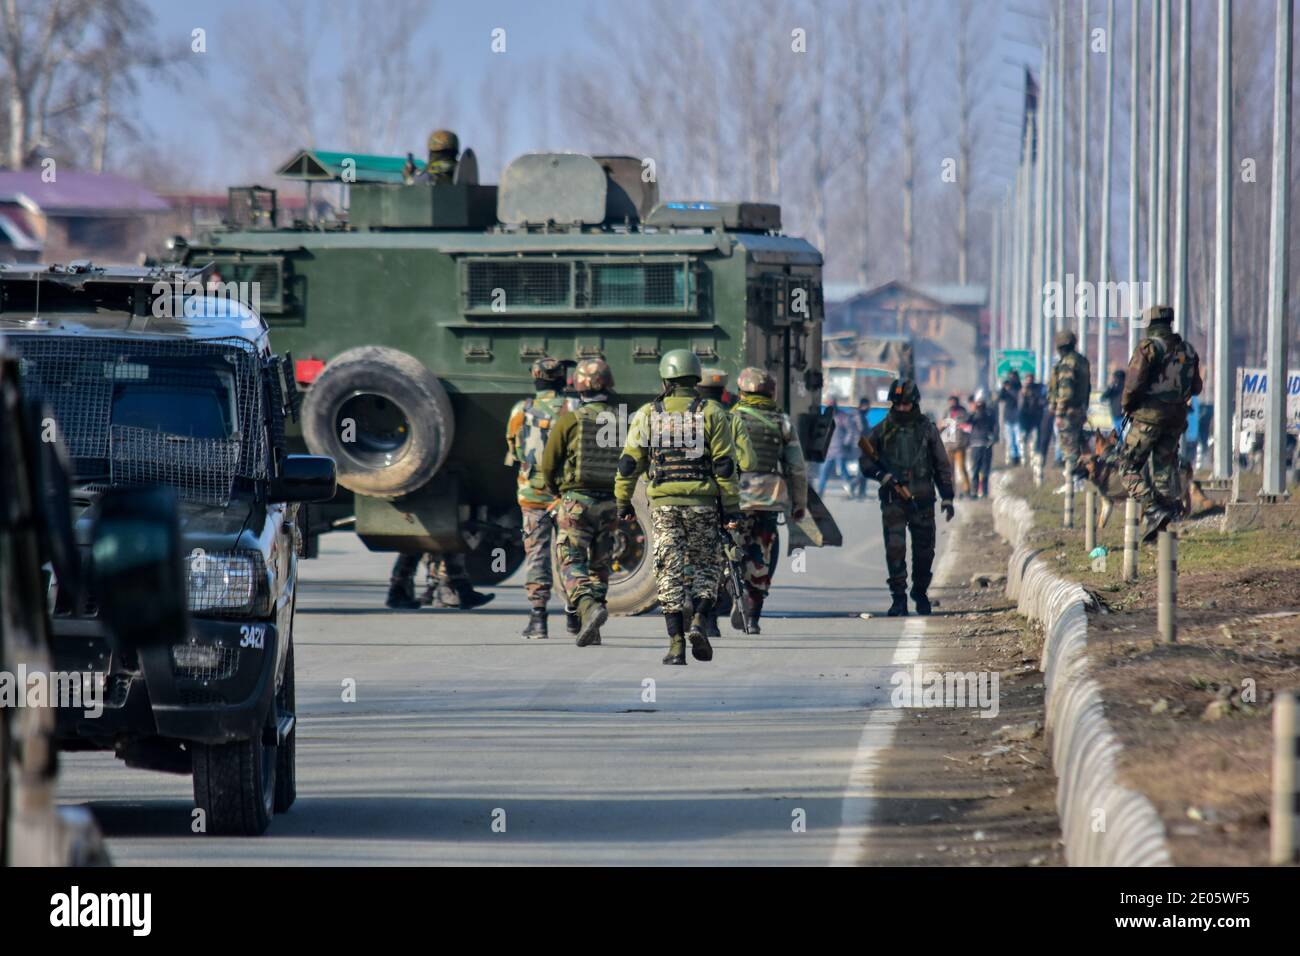 Indian army soldiers patrol near the gun battle site on the outskirts of Srinagar.Three militants were killed in an overnight gun battle with government forces in Lawaypora area of Srinagar. The militants killed were planning a big strike on the Srinagar-Muzaffarabad highway, an official said. Stock Photo